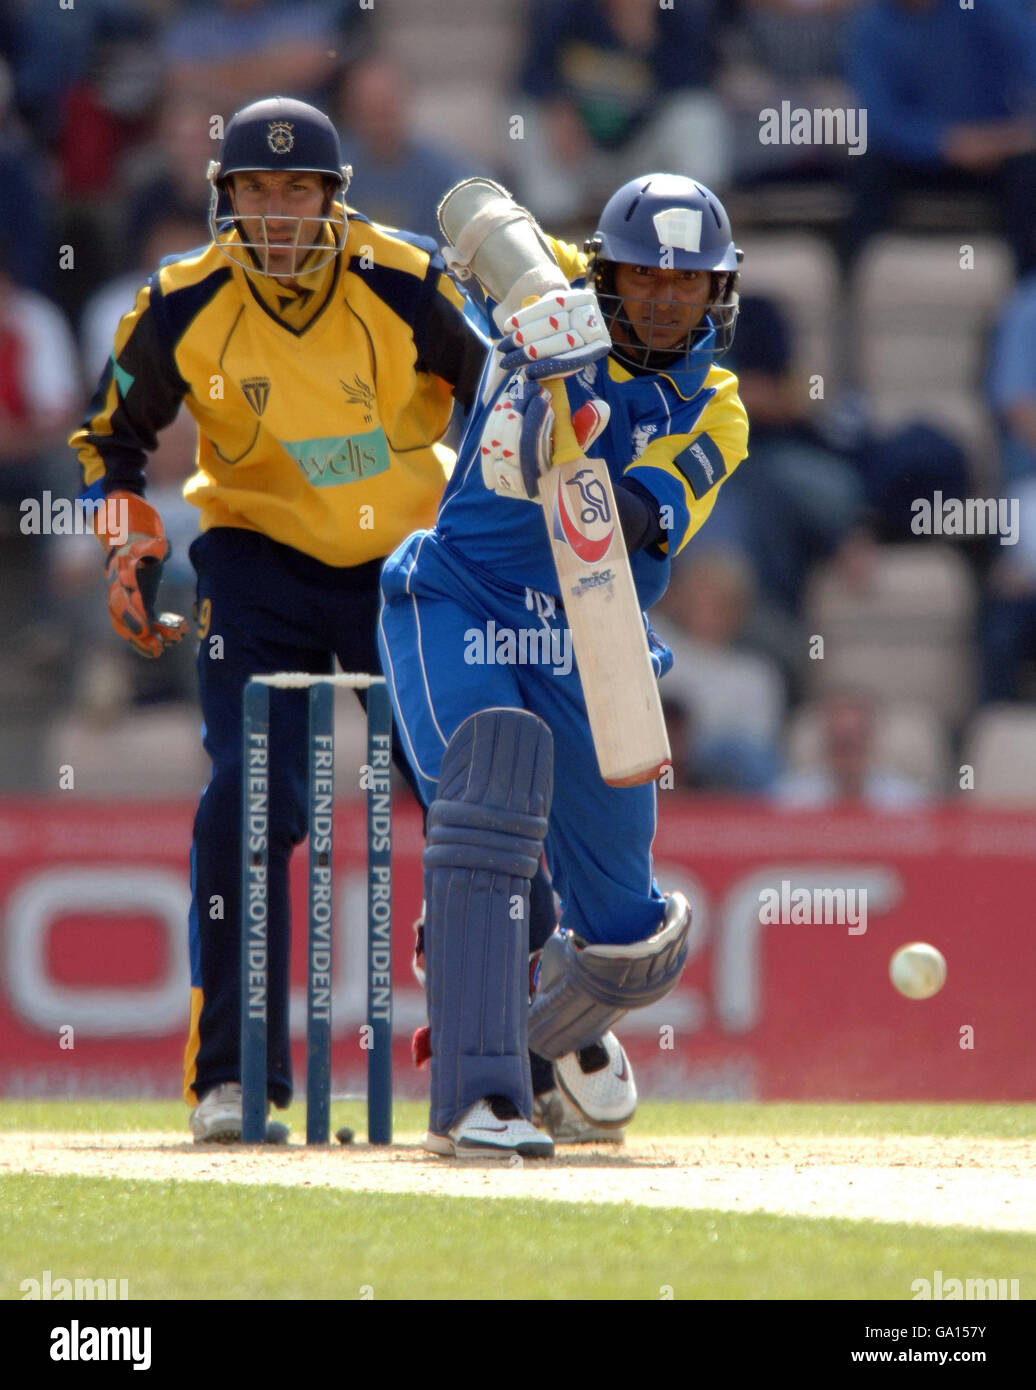 Warwickshire's Kumar Sangakkara in action during the Friends Provident Trophy Semi-Final match at The Rose Bowl, Southampton. Stock Photo